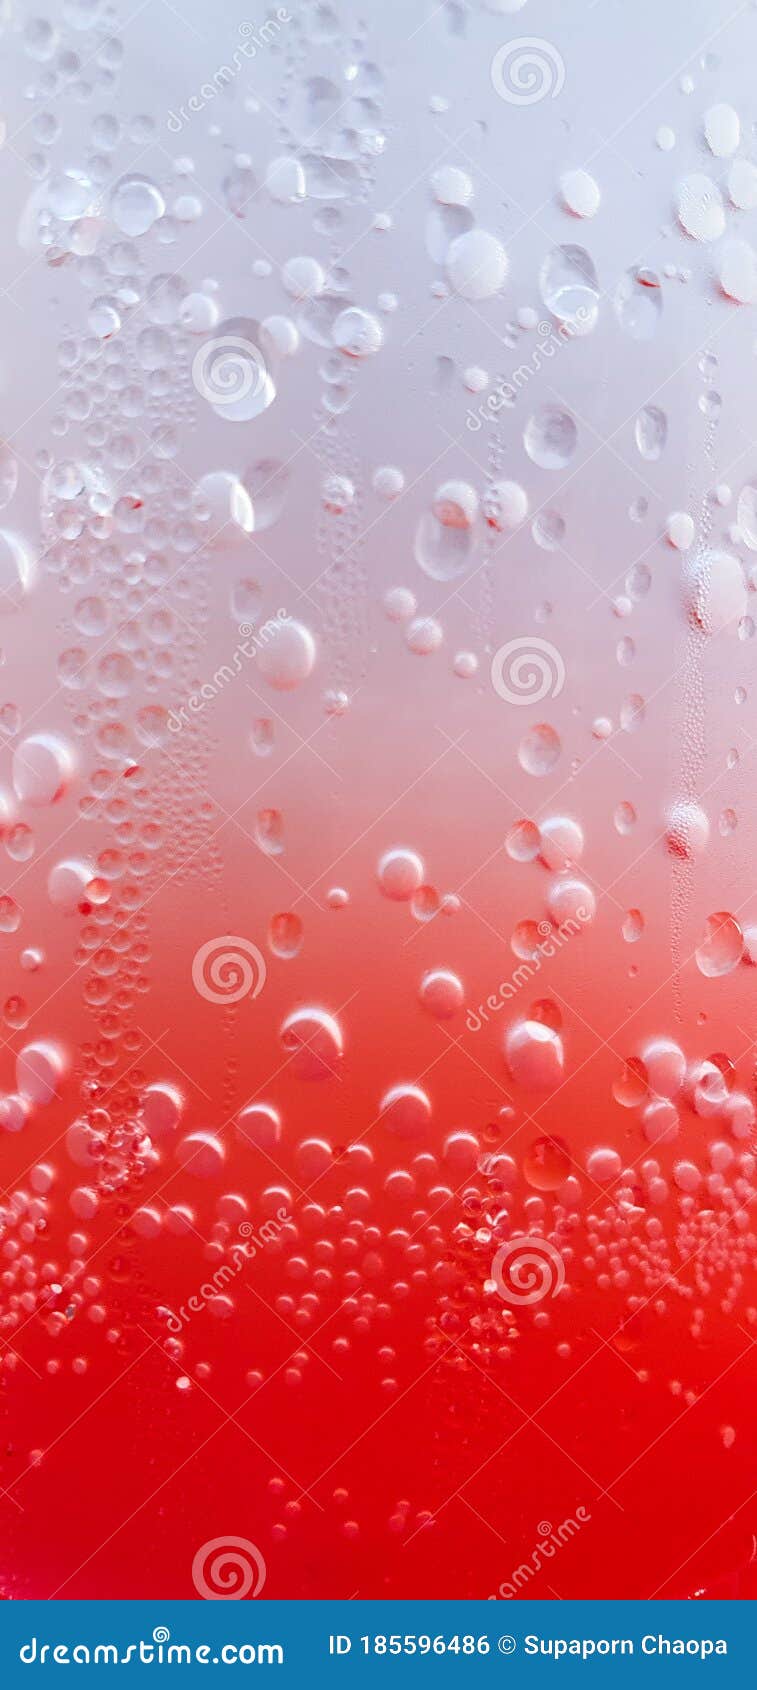 Soda Photos Download The BEST Free Soda Stock Photos  HD Images